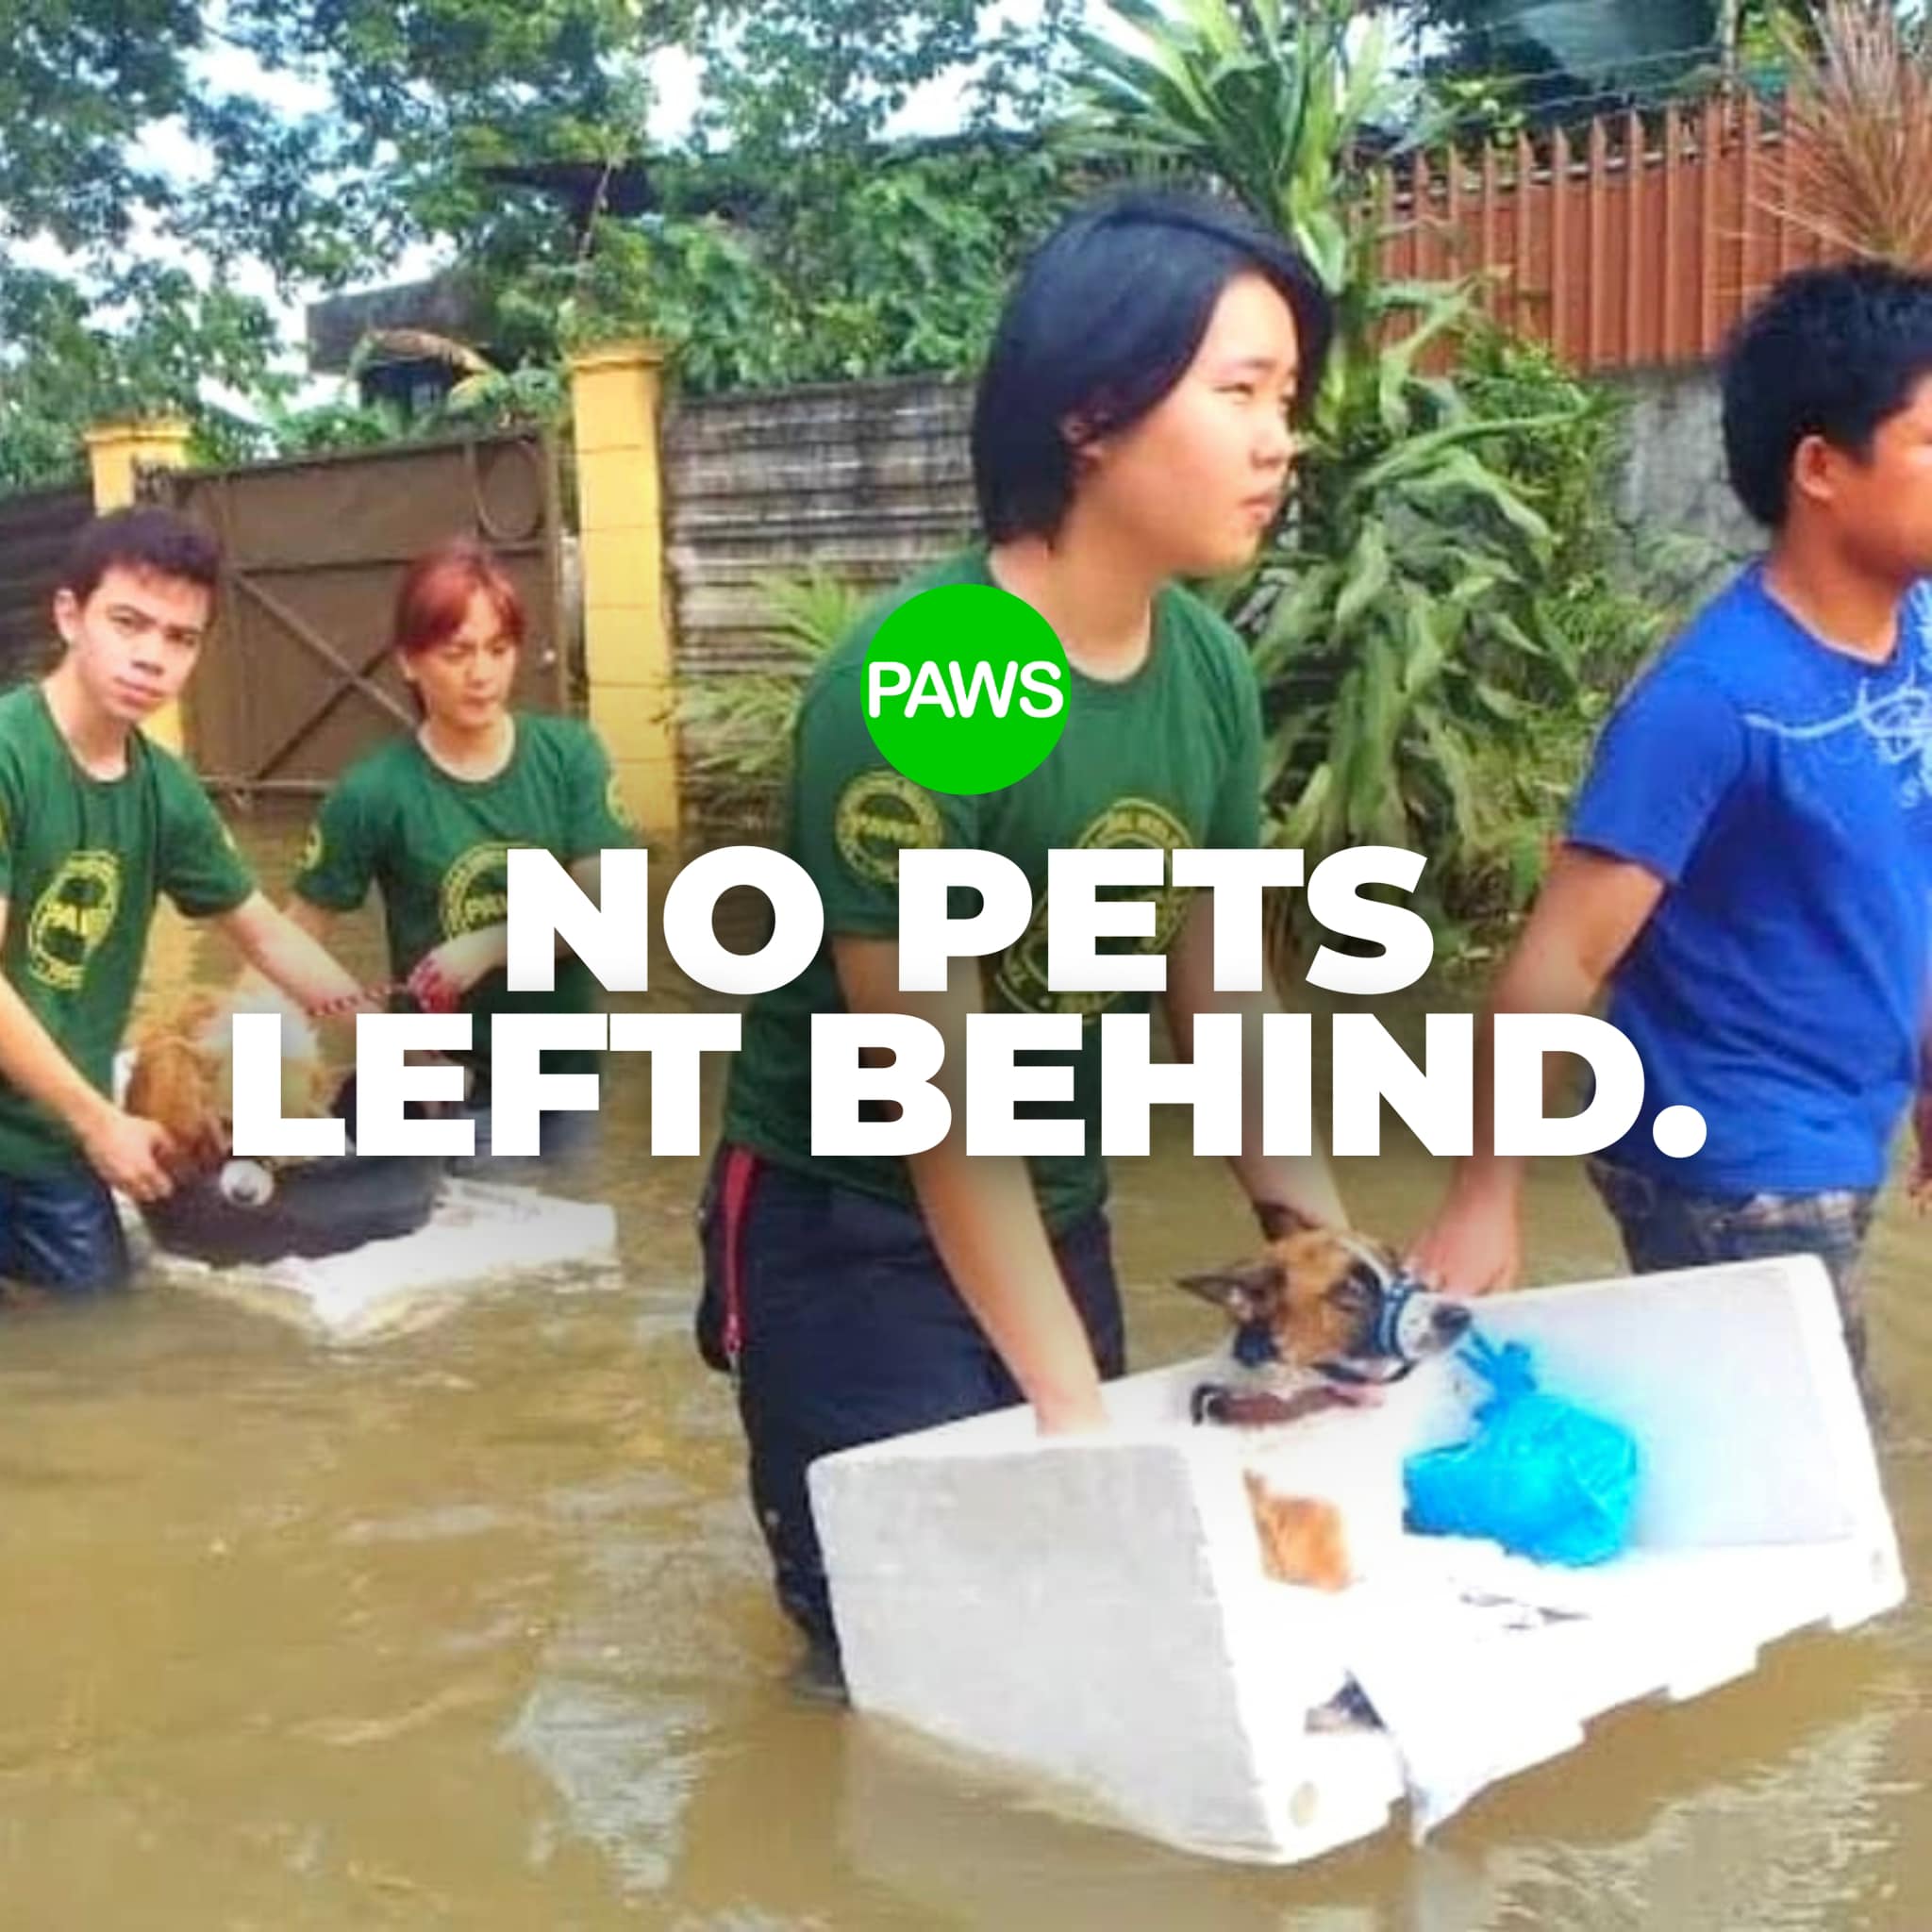 Evacuate, ensure safety of pets too during bad weather - PAWS